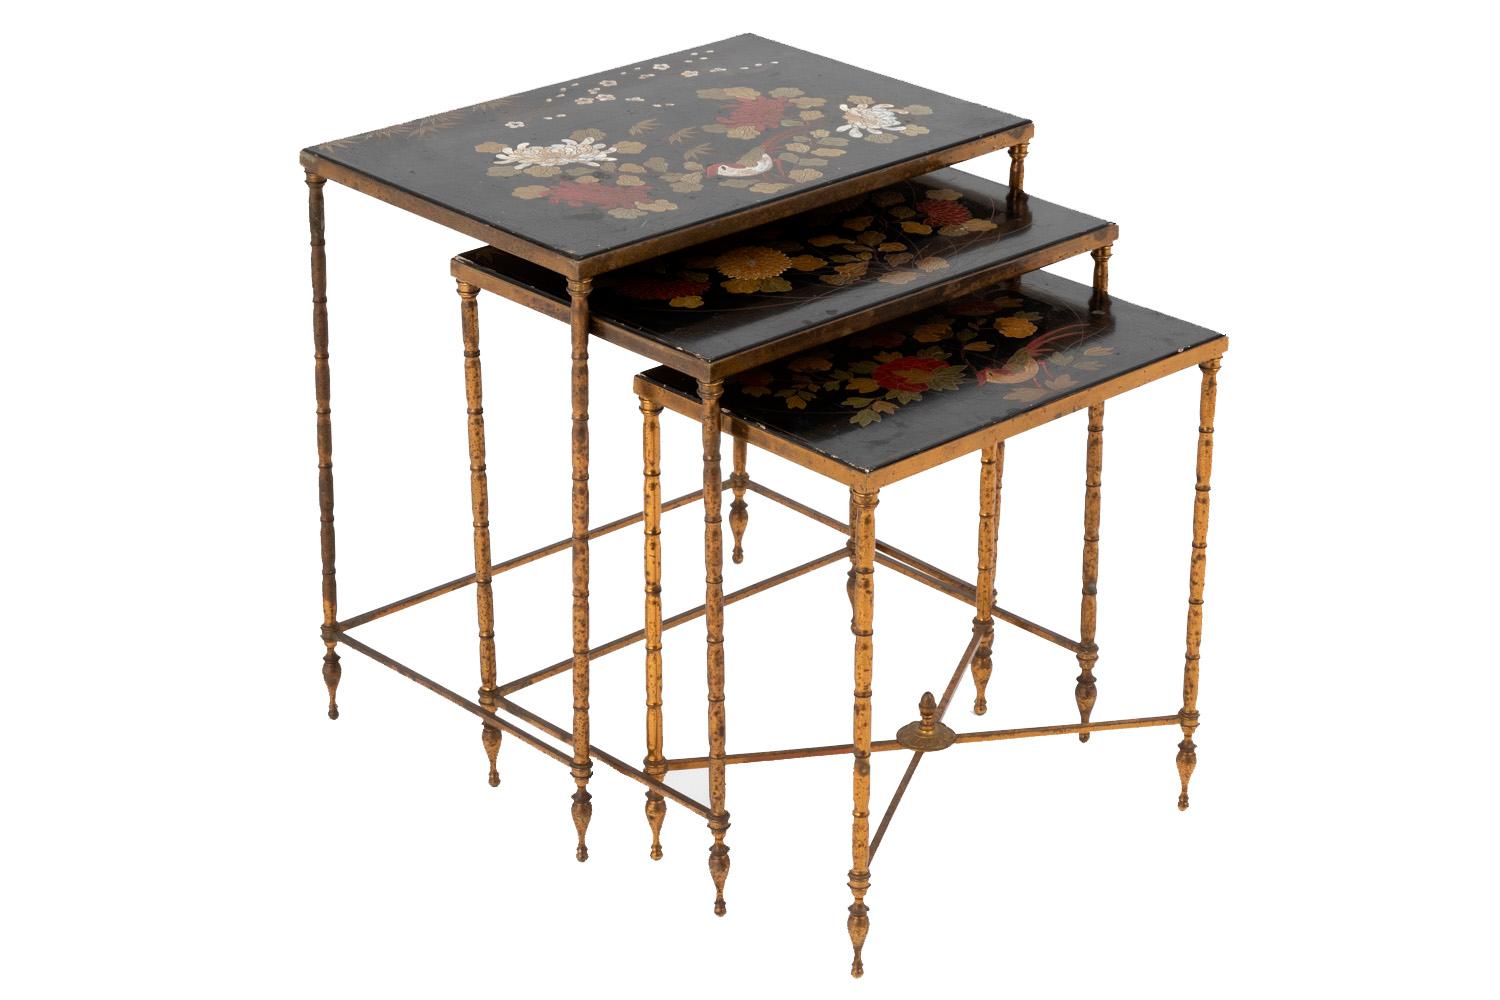 Chinoiserie Maison Baguès, Nested Tables in Flowered Black Lacquer, 1950s